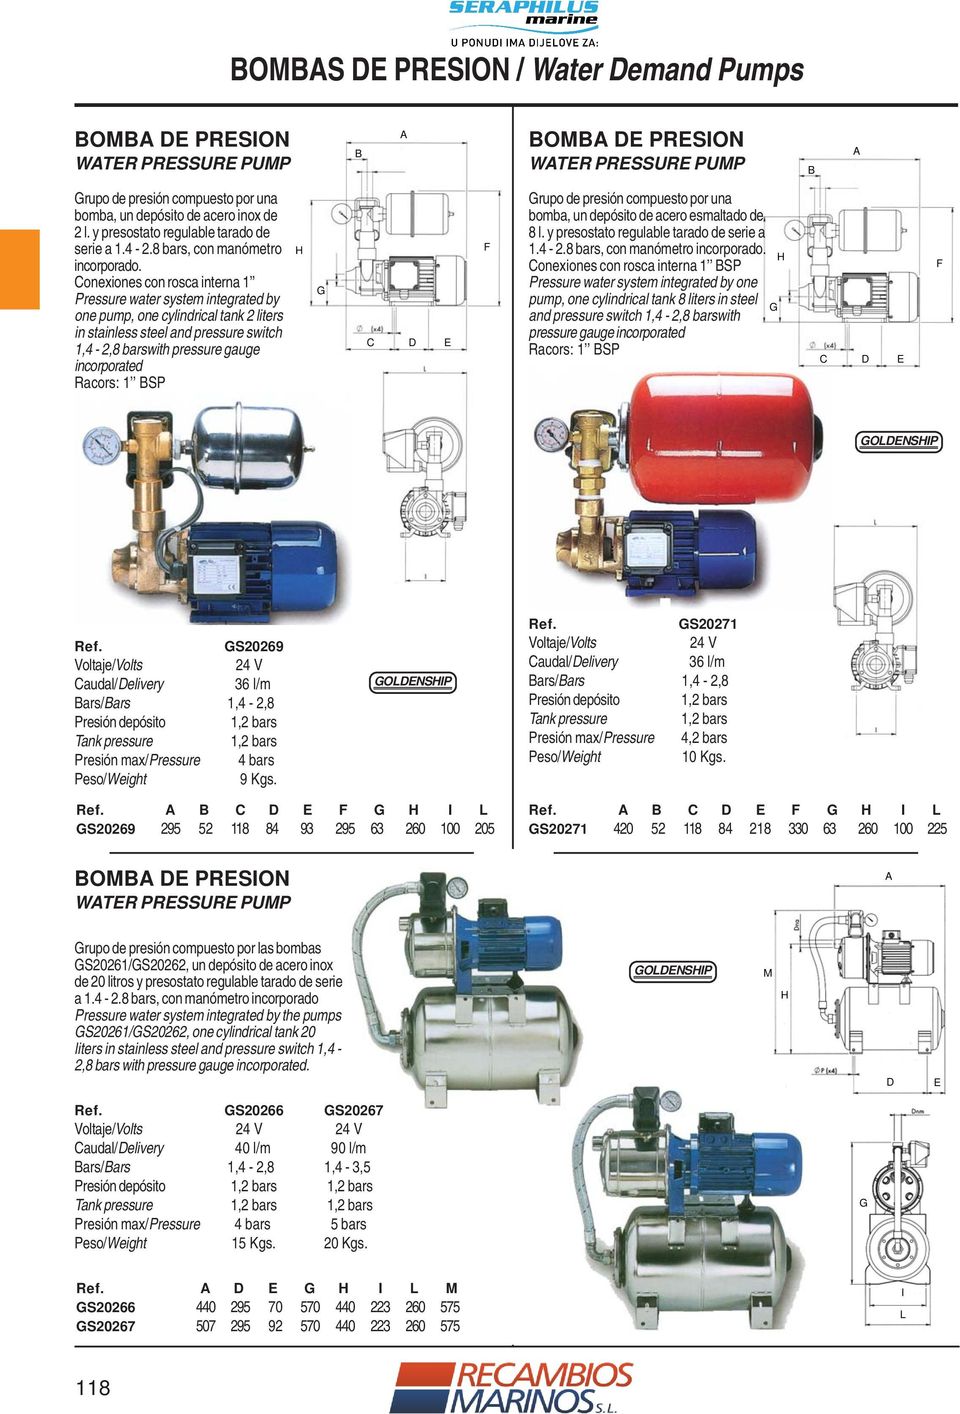 Conexiones con rosca interna 1 Pressure water system integrated by one pump, one cylindrical tank 2 liters in stainless steel and pressure switch 1,4-2,8 barswith pressure gauge incorporated Racors: